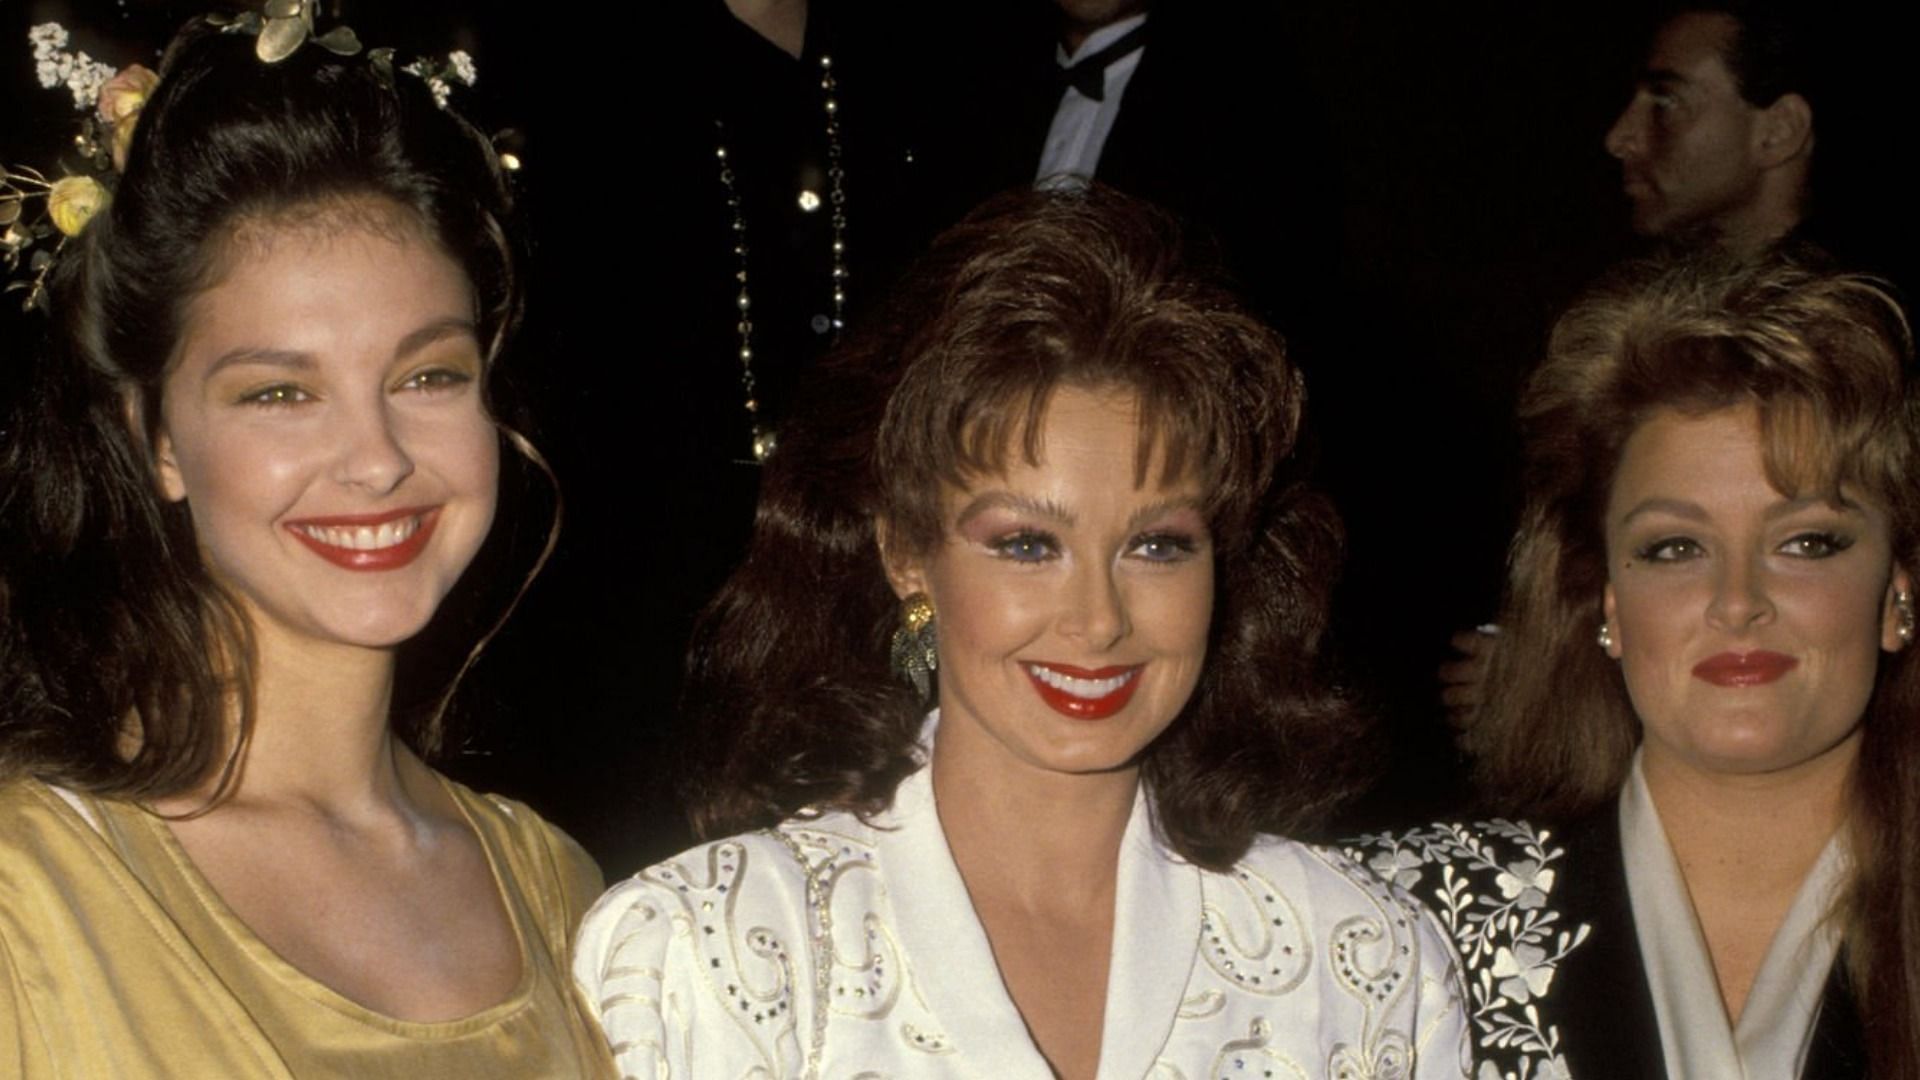 Naomi Judd had two daughters, Wynonna and Ashley (Image via Jim Smeal/Getty Images)